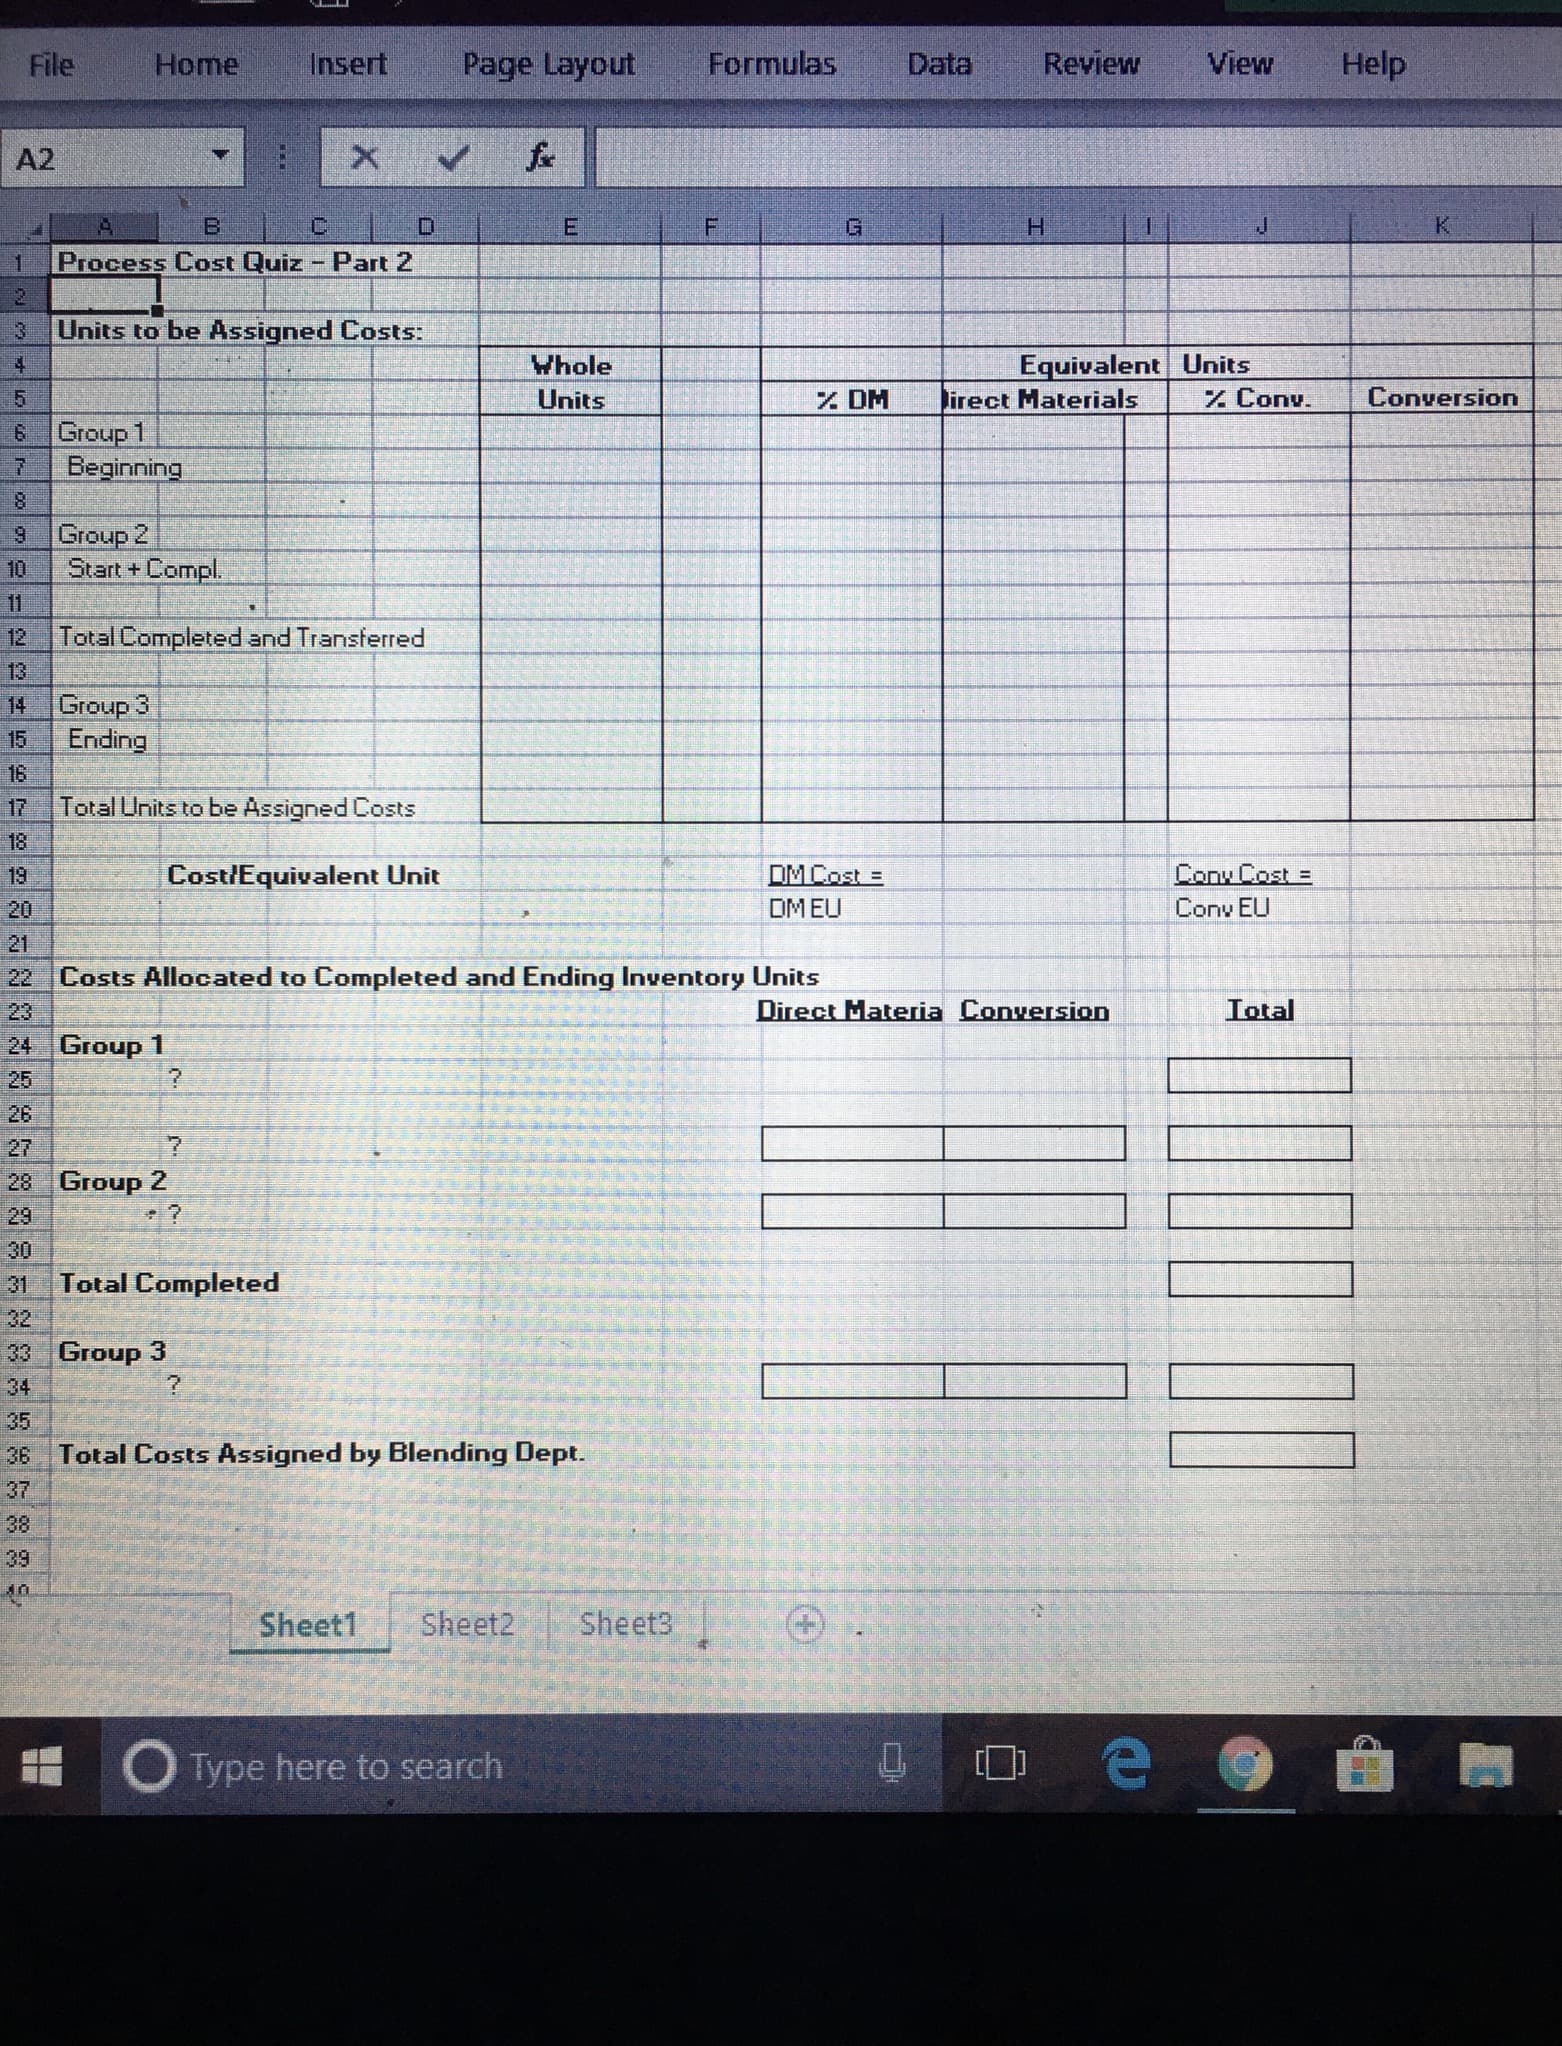 File
Home
Insert
Page Layout
Formulas
Data
Review
View
Help
A2
B:
H.
1
Process Cost Quiz - Part 2
3.
Units to be Assigned Costs:
Equivalent Units
Z Conv.
Whole
Units
% DM
lirect Materials
Conversion
6 Group 1
Beginning
Group 2
Start +Compl.
10
11
12 Total Completed and Transterred
13
14
Group 3
15
Ending
16
17
Total Units to be Assigned Costs
18
19
Cost/Equivalent Unit
DMCost =
Cony Cost =
20
DMEU
Conv EU
21
22 Costs Allocated to Completed and Ending Inventory Units
23
Direct Materia Conversion
Total
24 Group 1
26
27
28 Group 2
29
•?
30
31
Total Completed
32
33 Group 3
34
36 Total Costs Assigned by Blending Dept.
37
39
Sheet1
Sheet2
Sheet3
O Type here to search
(+)
